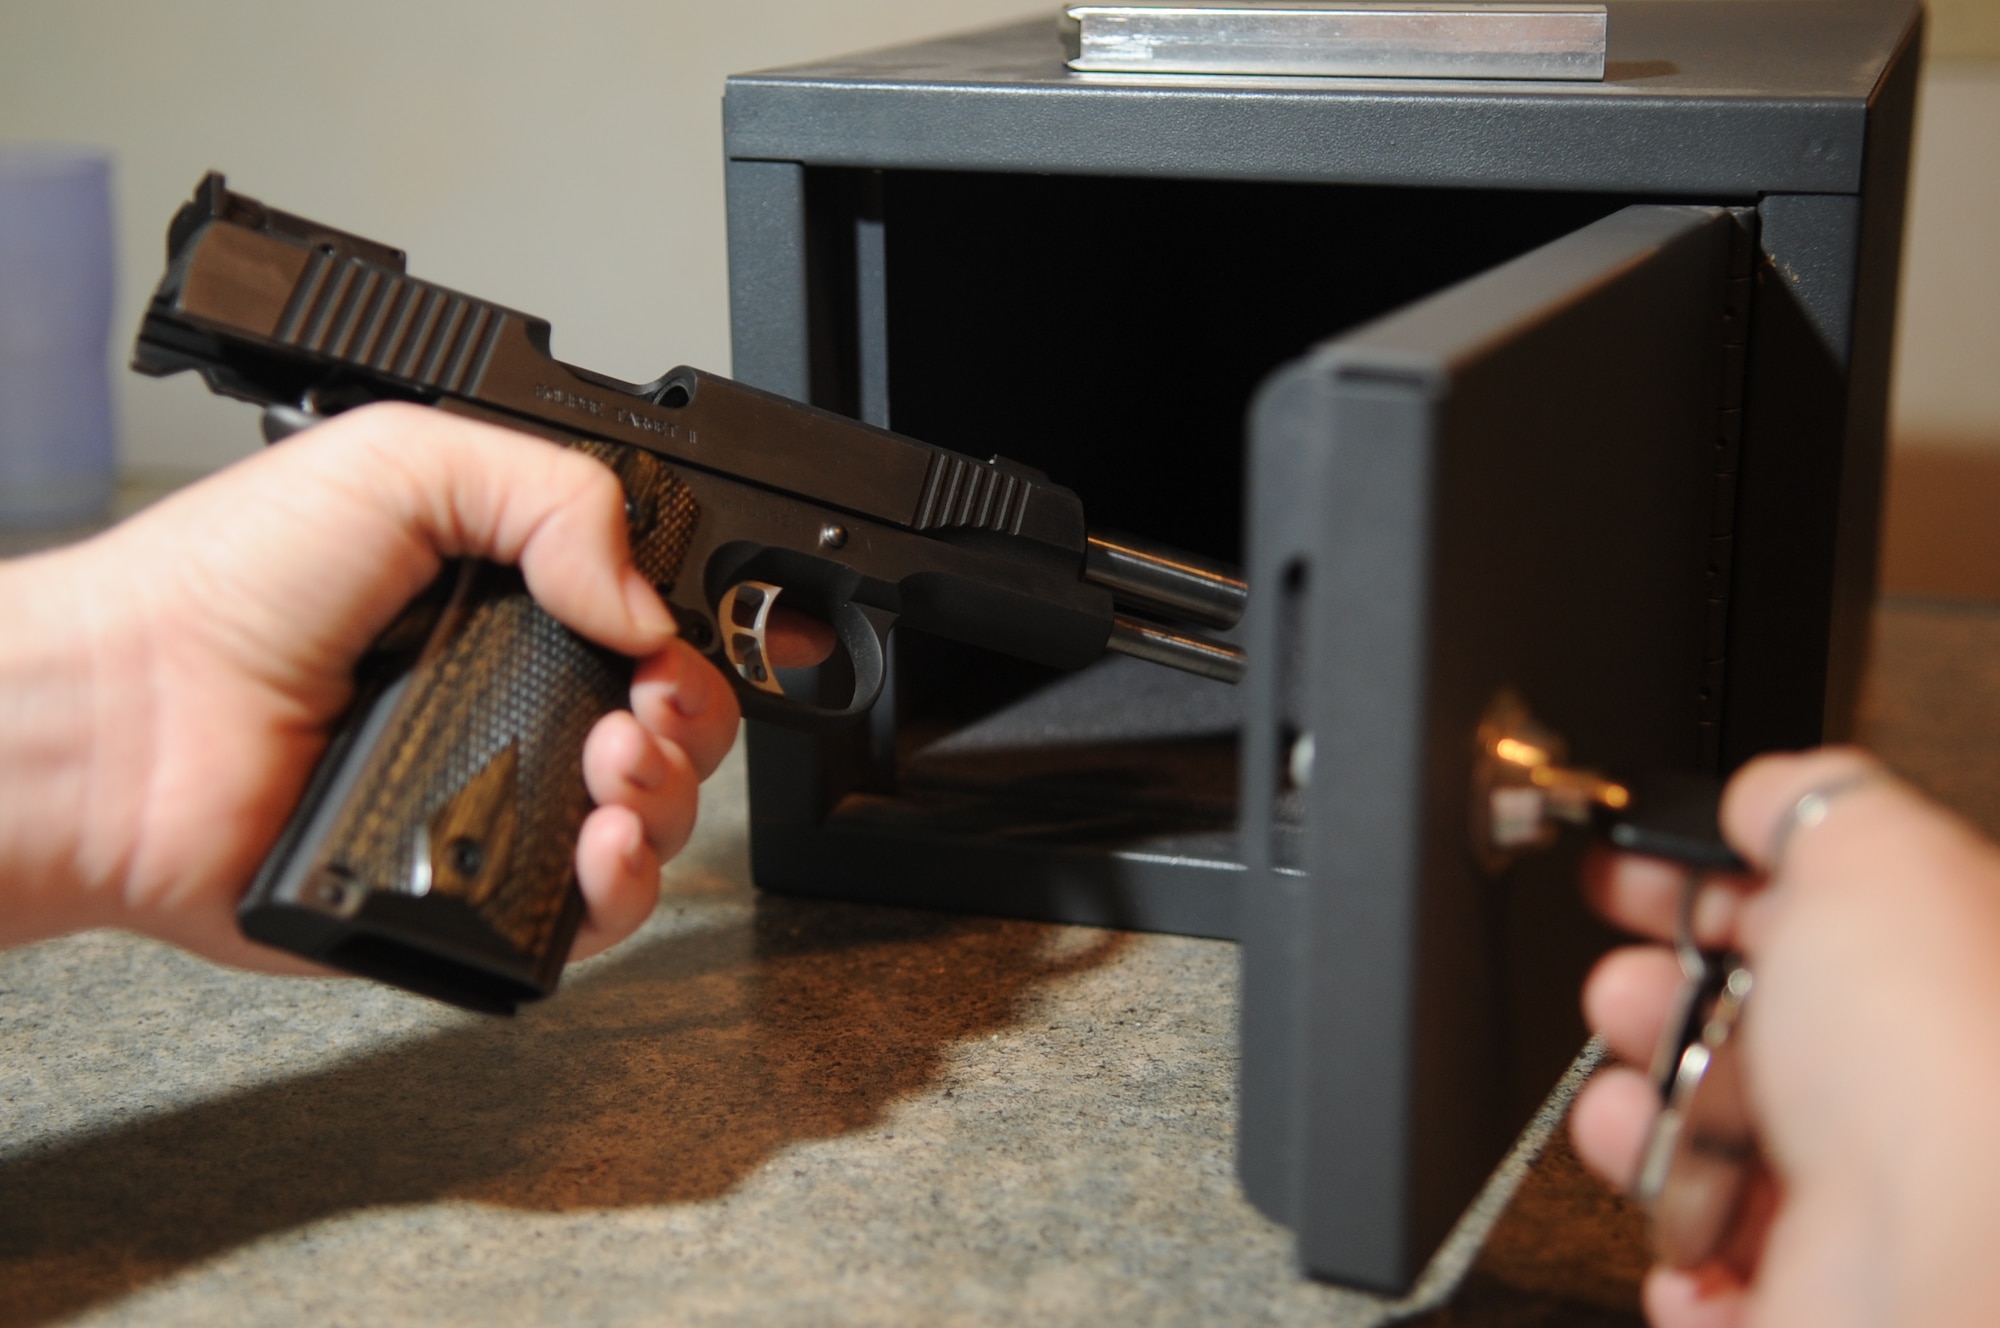 III. Factors to Consider Before Owning a Firearm